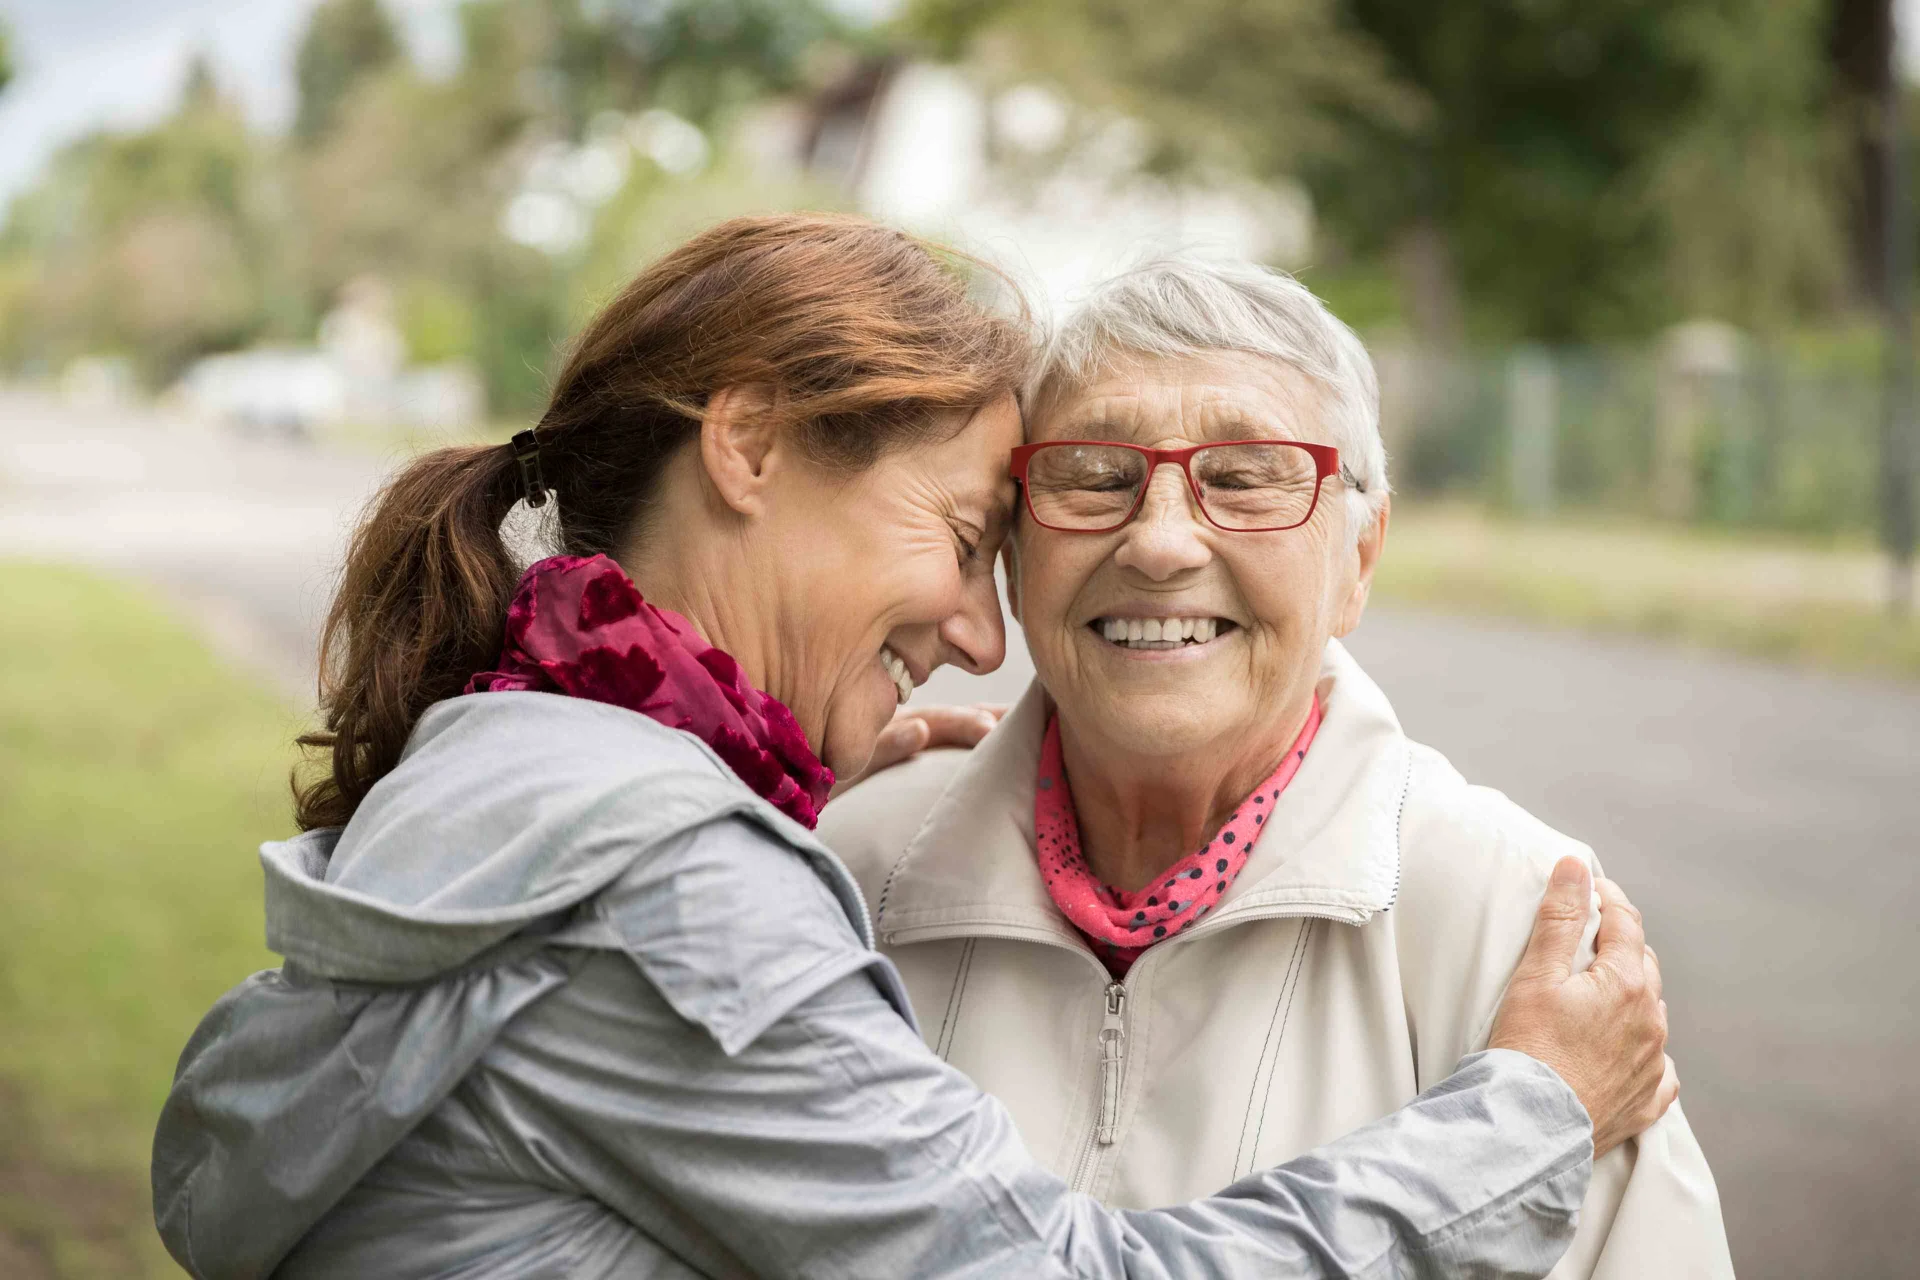 A smiling woman hugs an older woman who is also smiling.